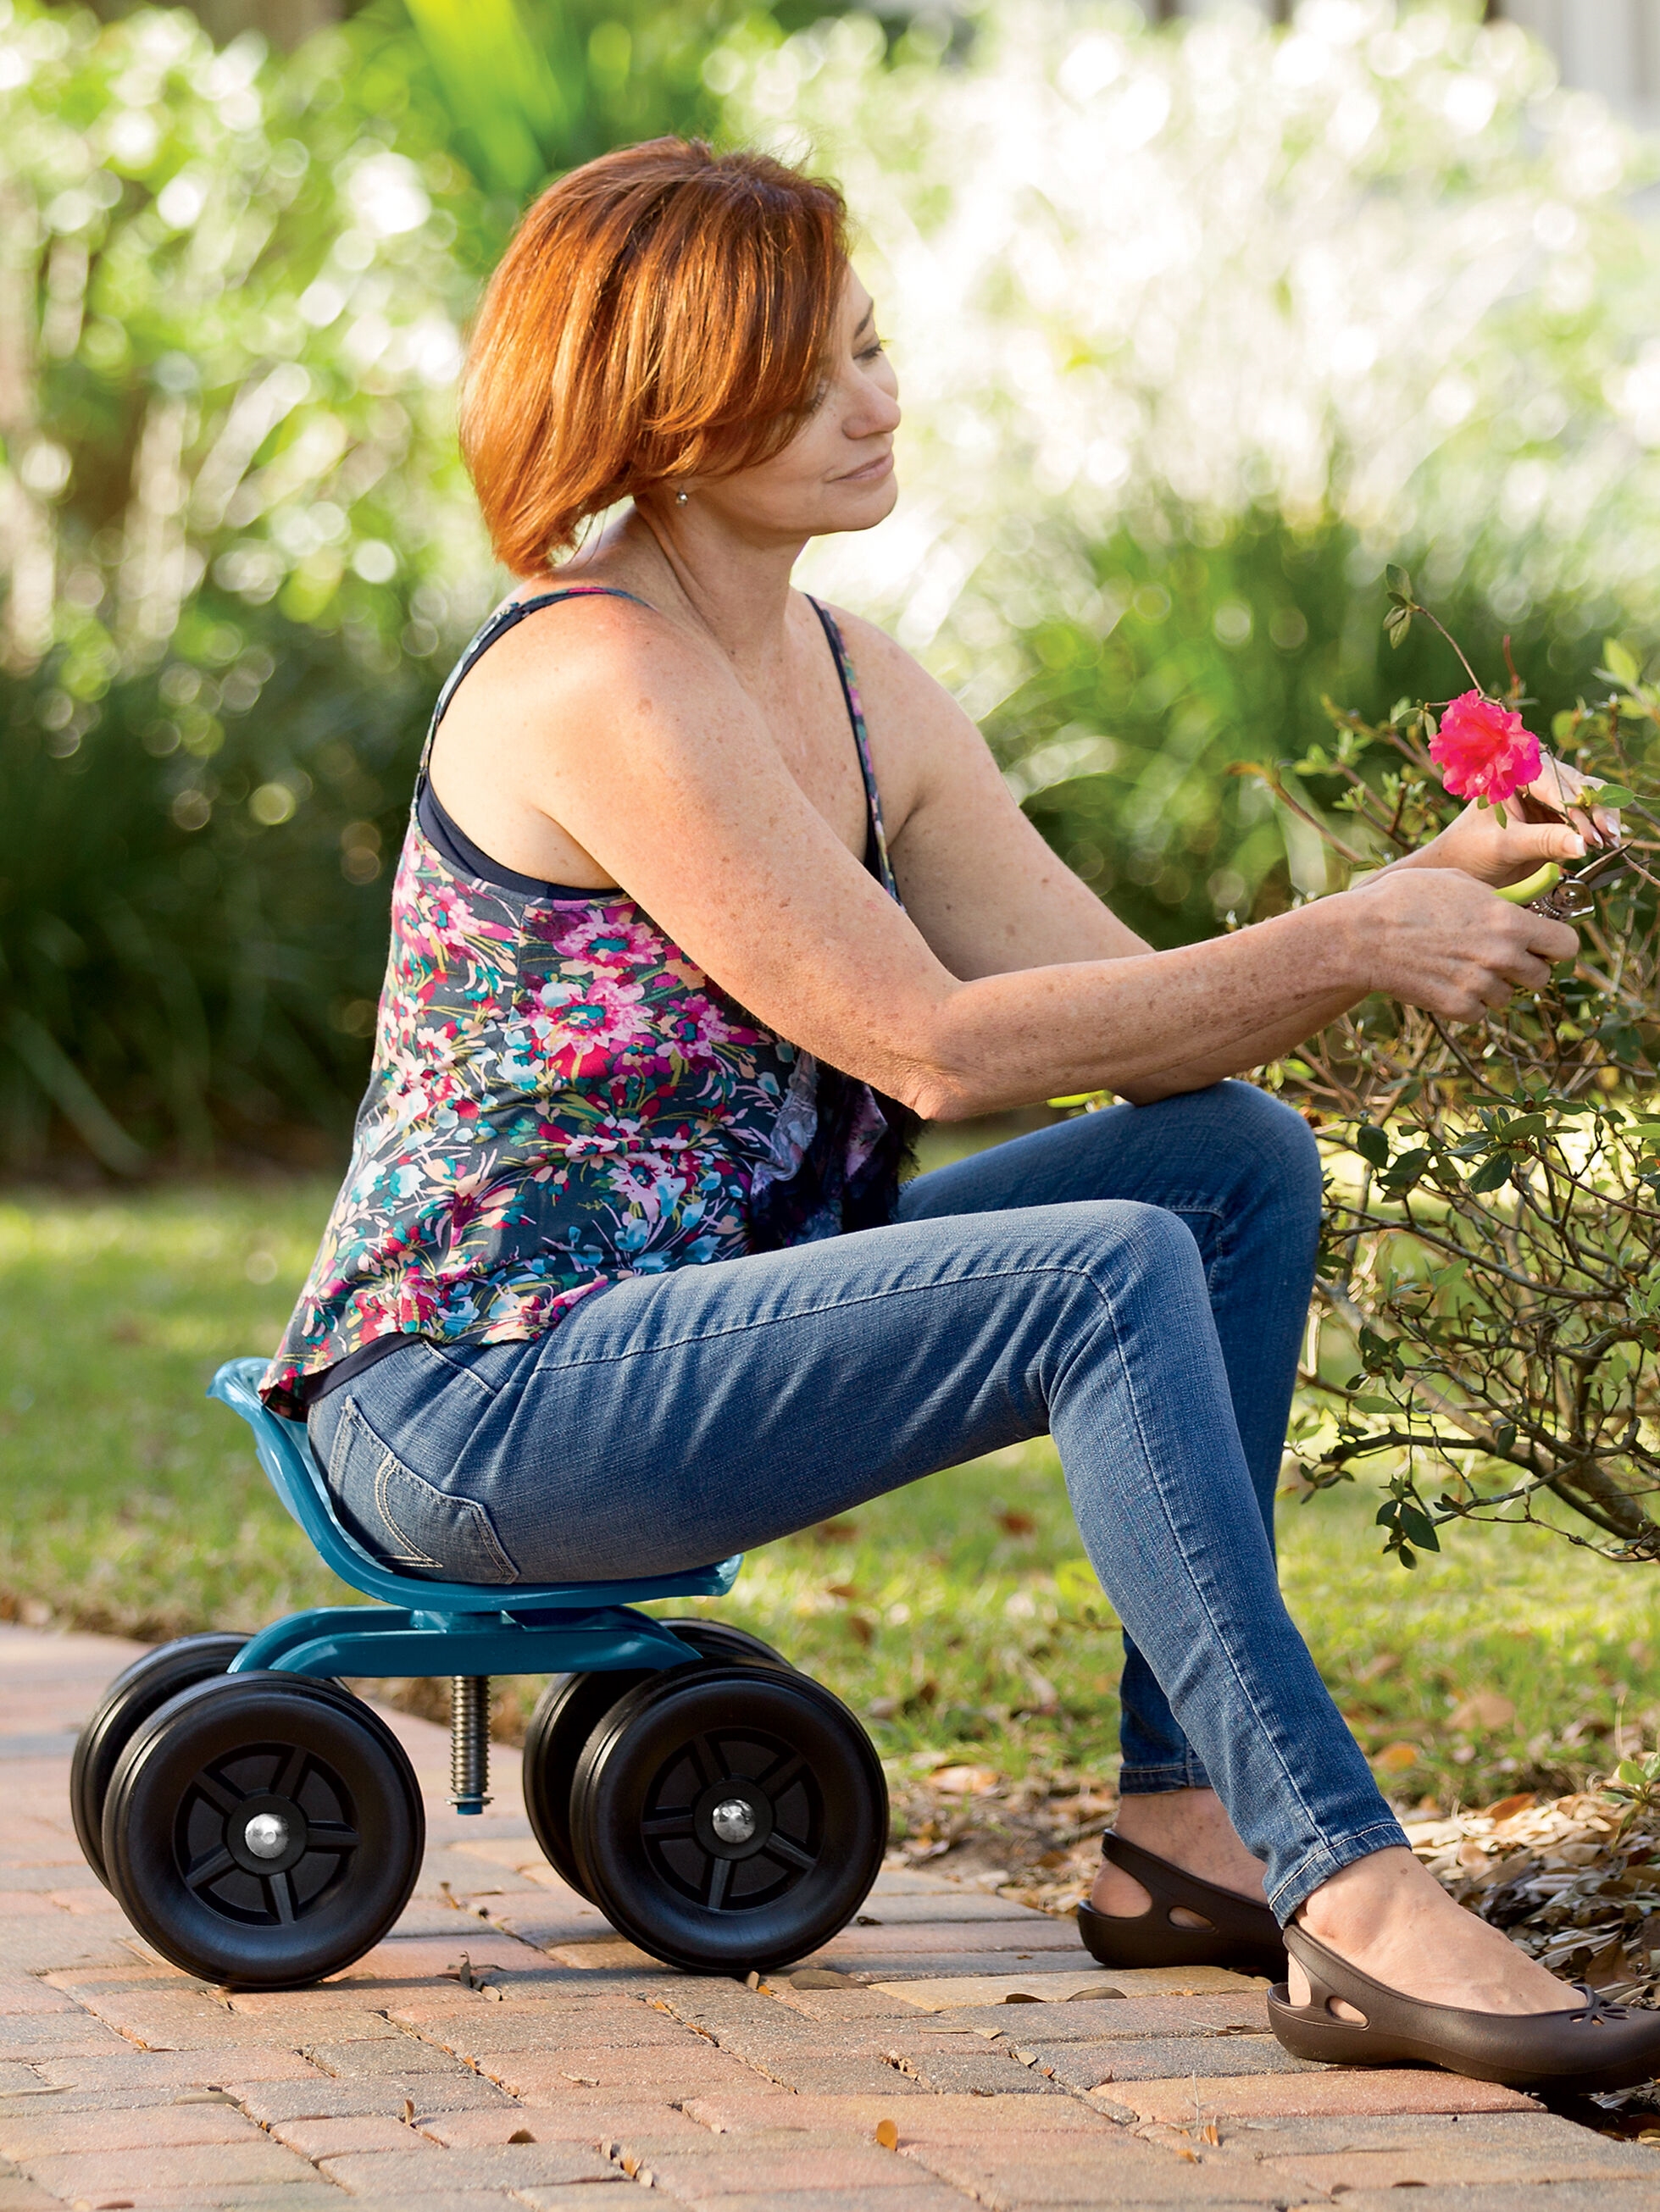 weeding stool with wheels - OFF-58% > Shipping free